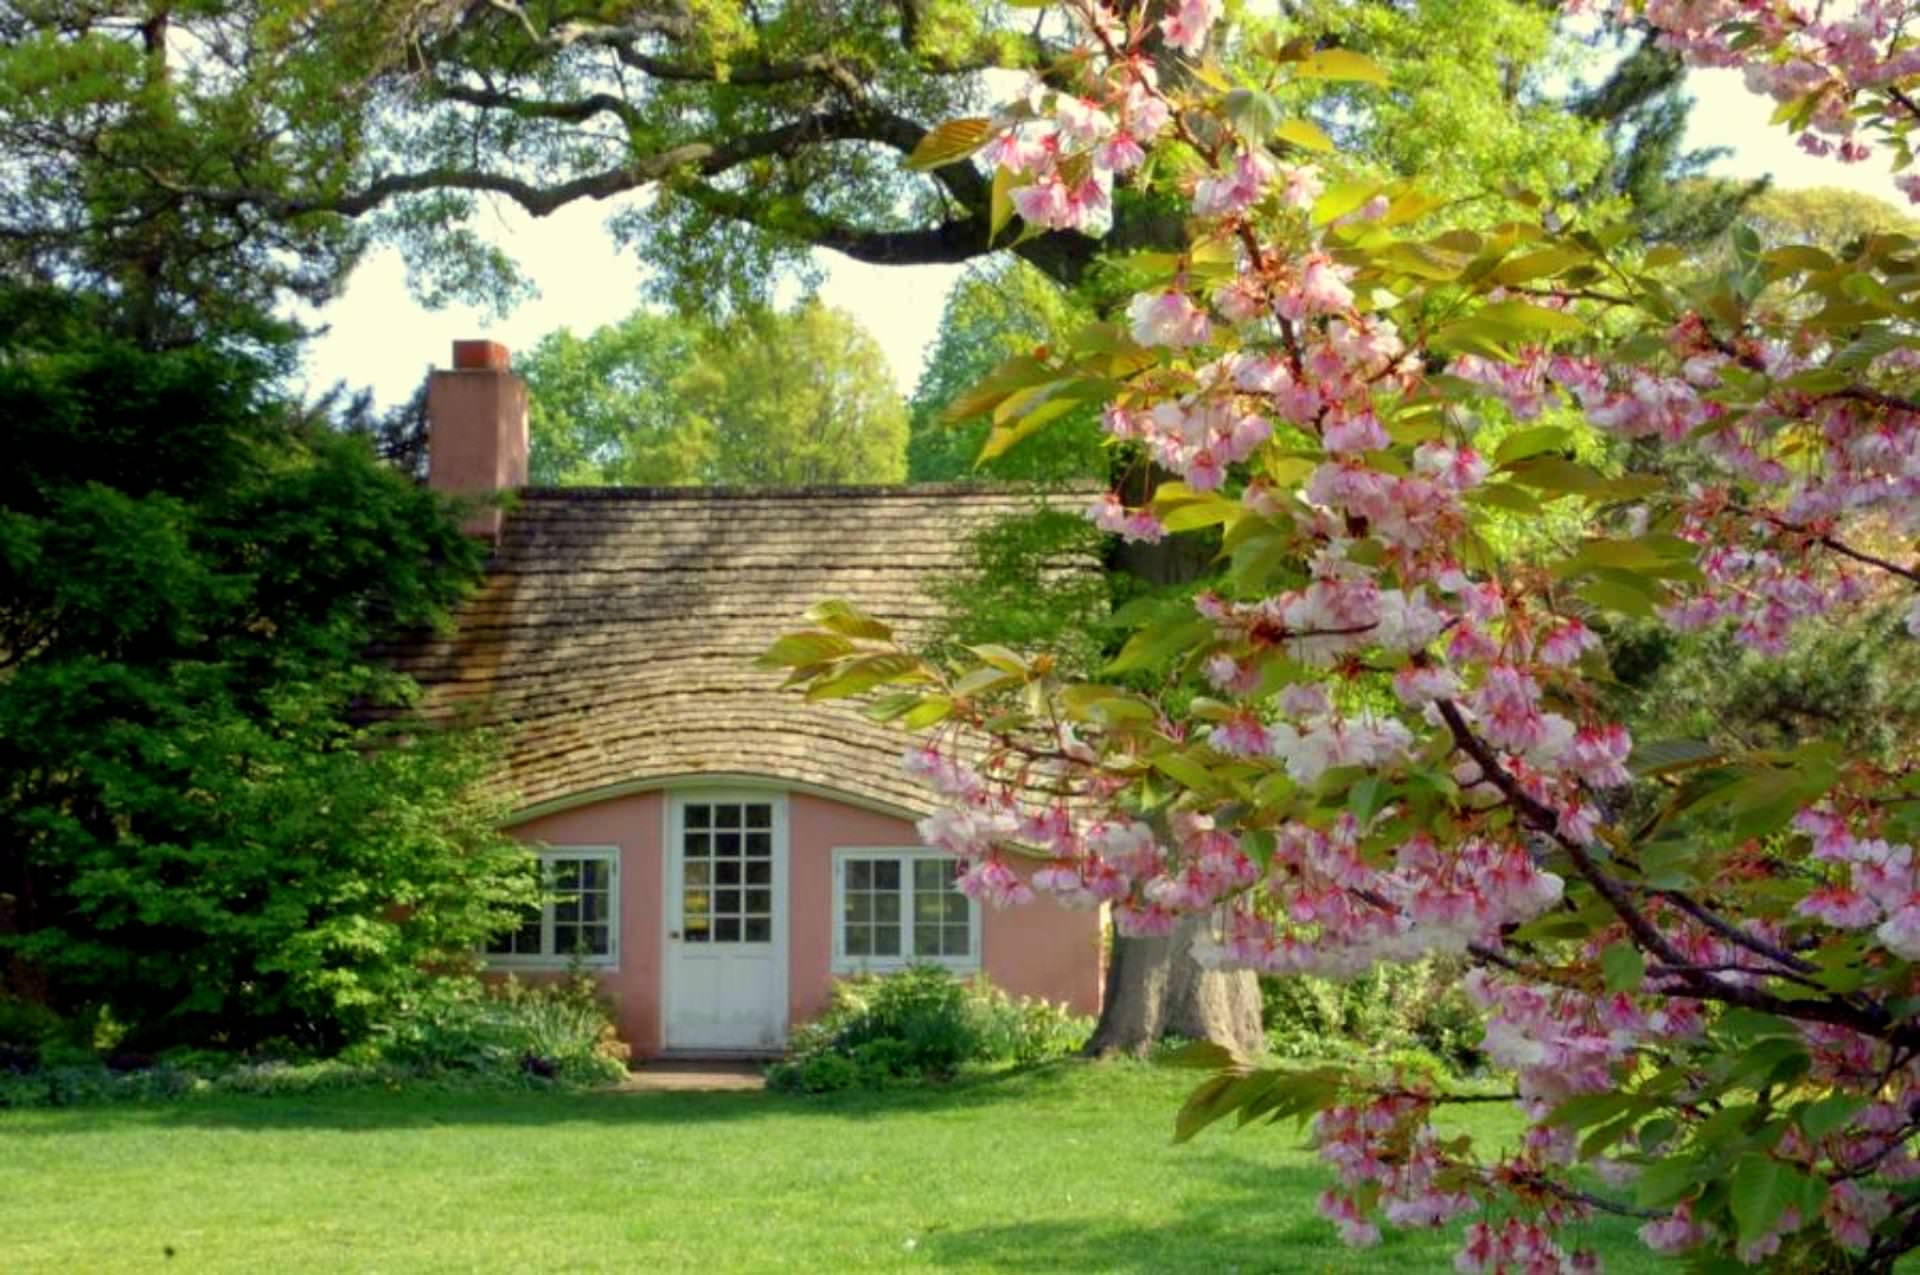 Cottage Wallpapers Top Free Cottage Backgrounds Wallpaperaccess